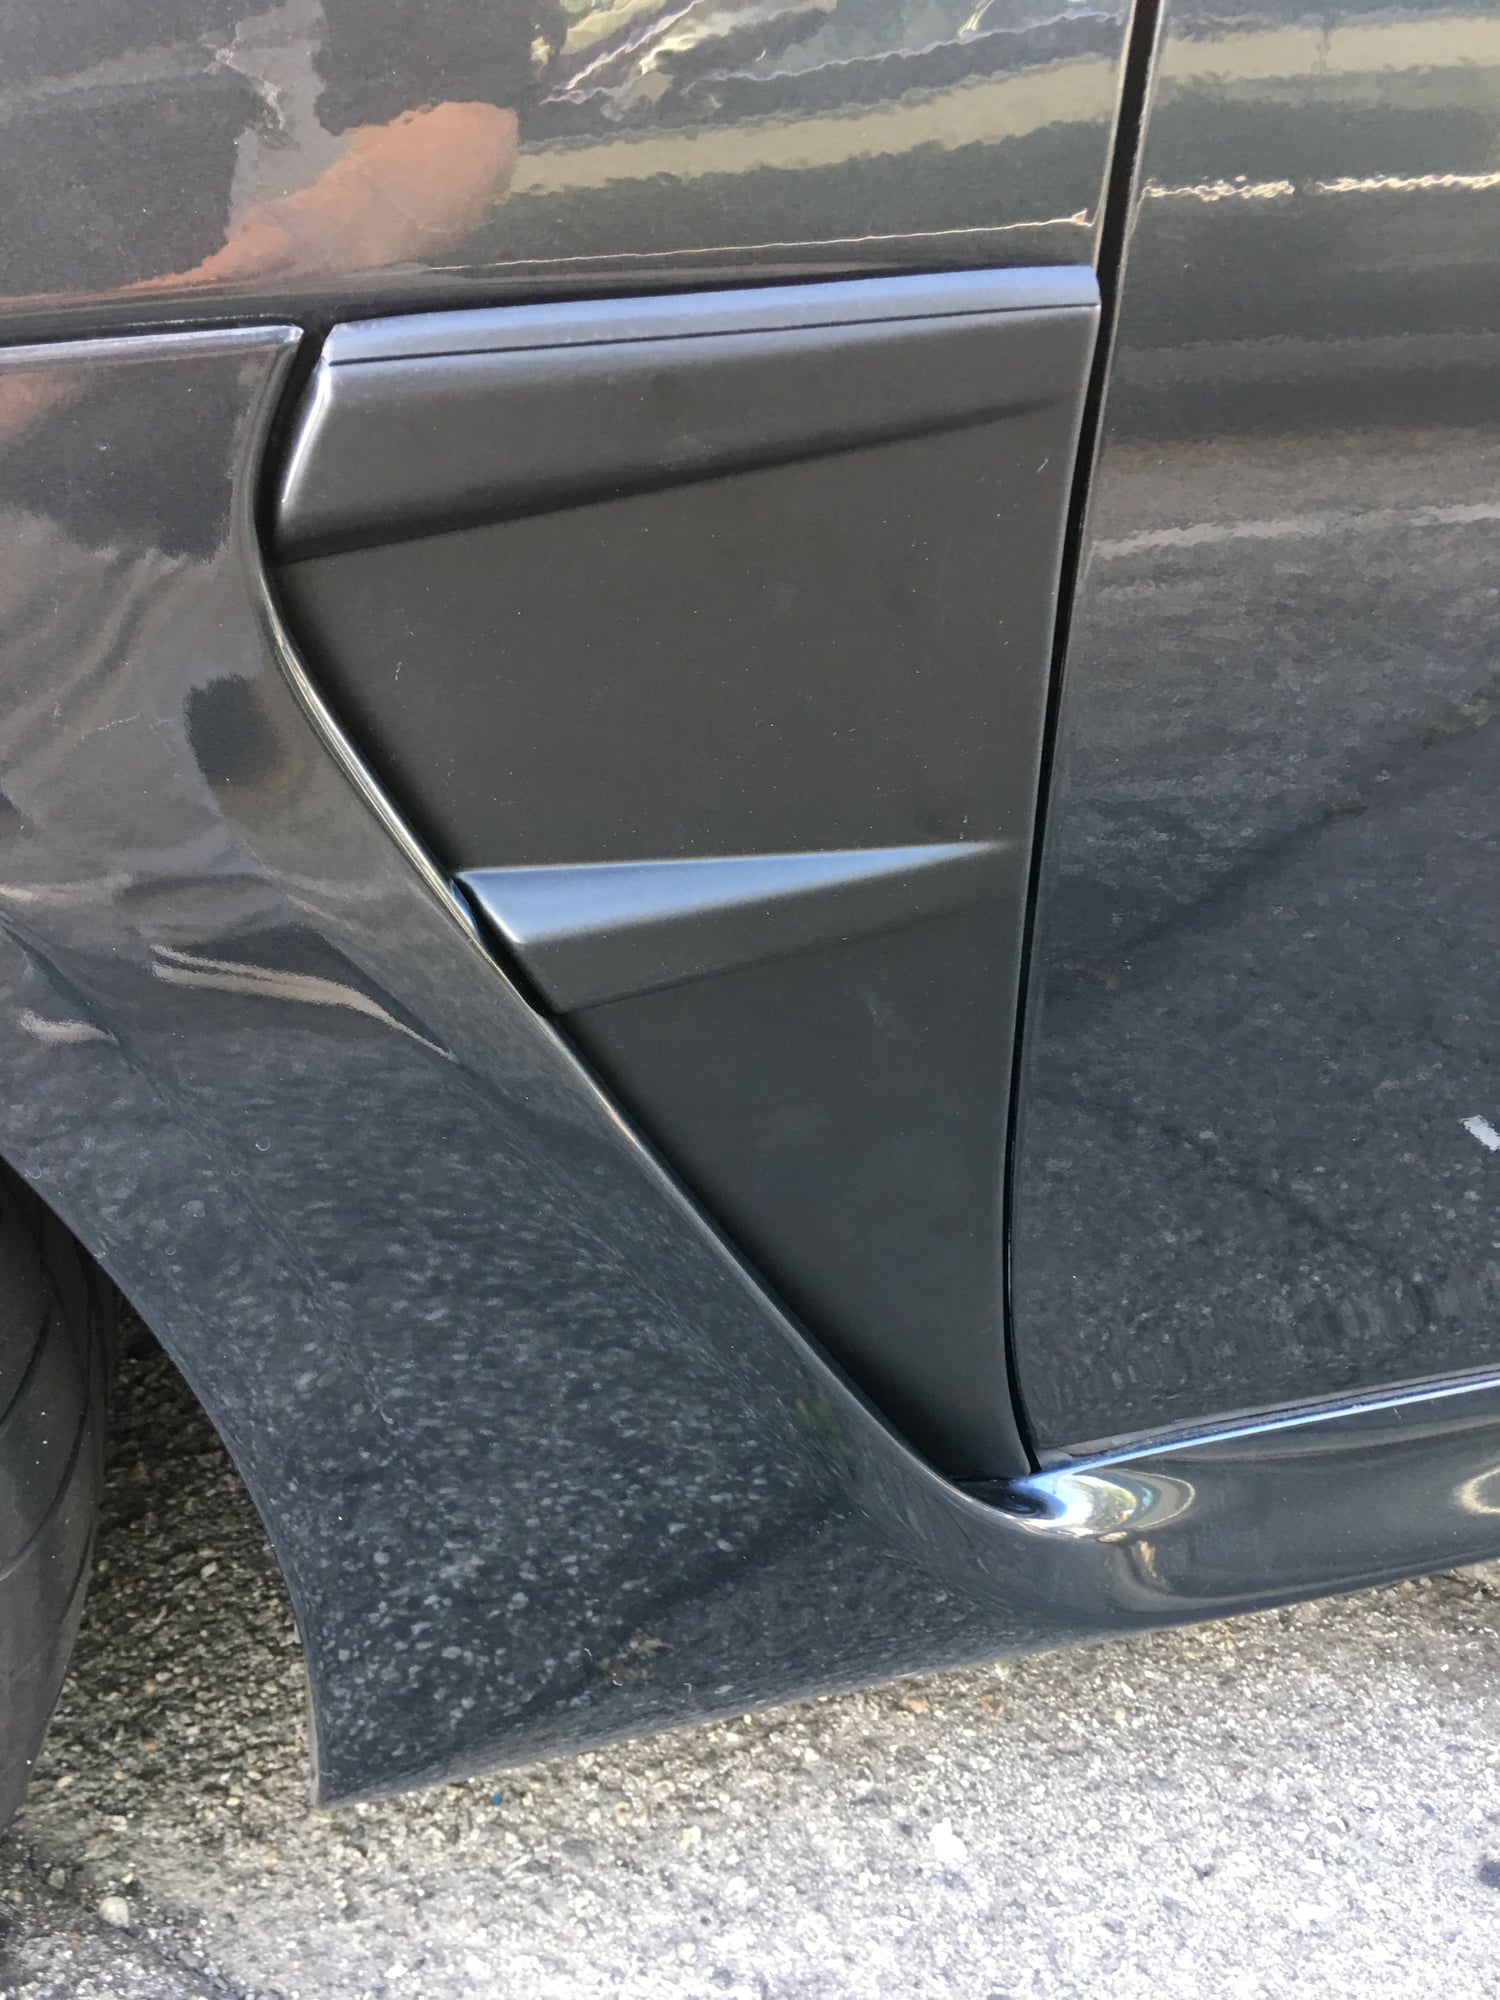 Exterior Body Parts - New Lexus ISF Novel Style Fender Ducts - Matte Black - New - 2008 to 2014 Lexus IS F - Covina, CA 91722, United States